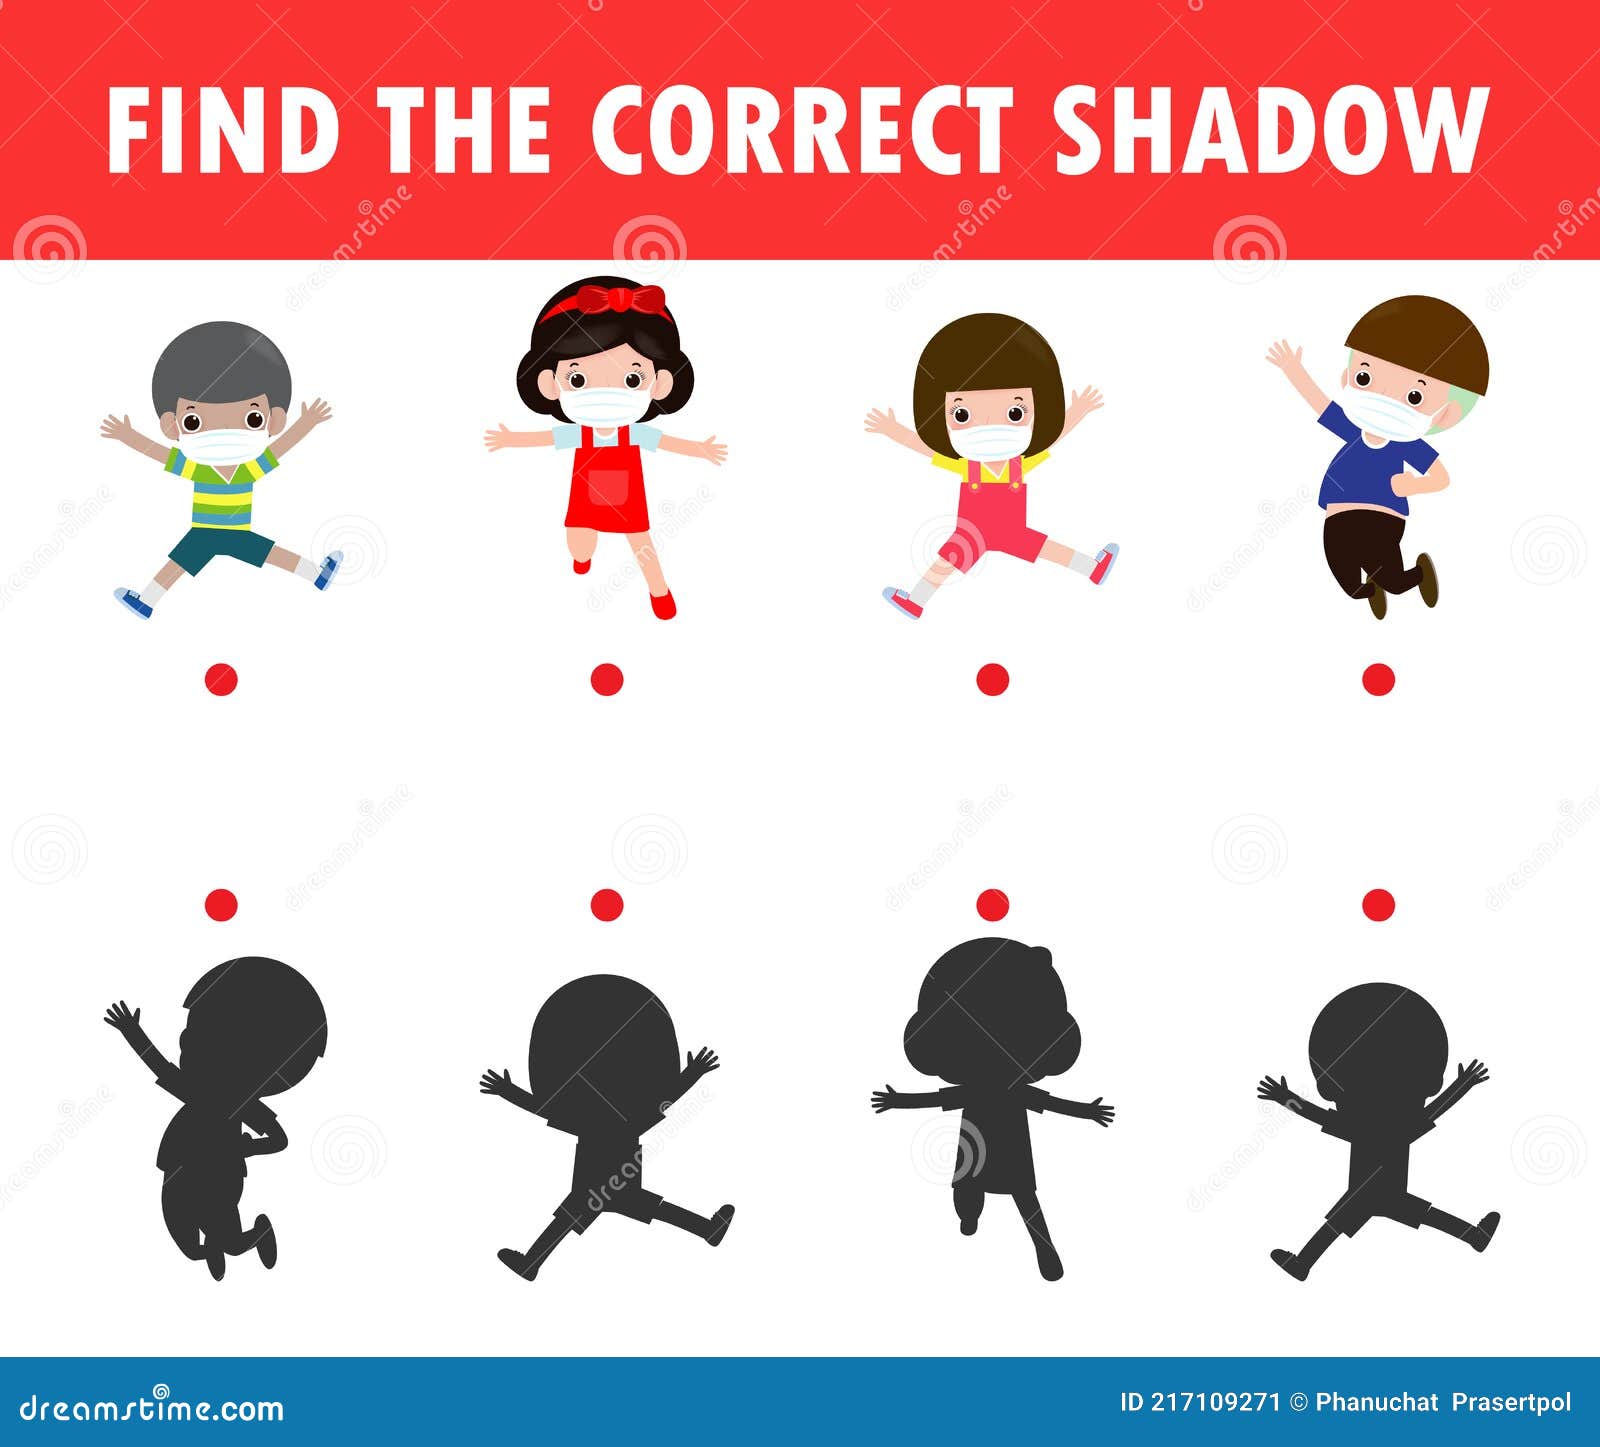 shadow matching game for kids, visual game for kid, find the correct shadow, instructional media, connect the dots picture